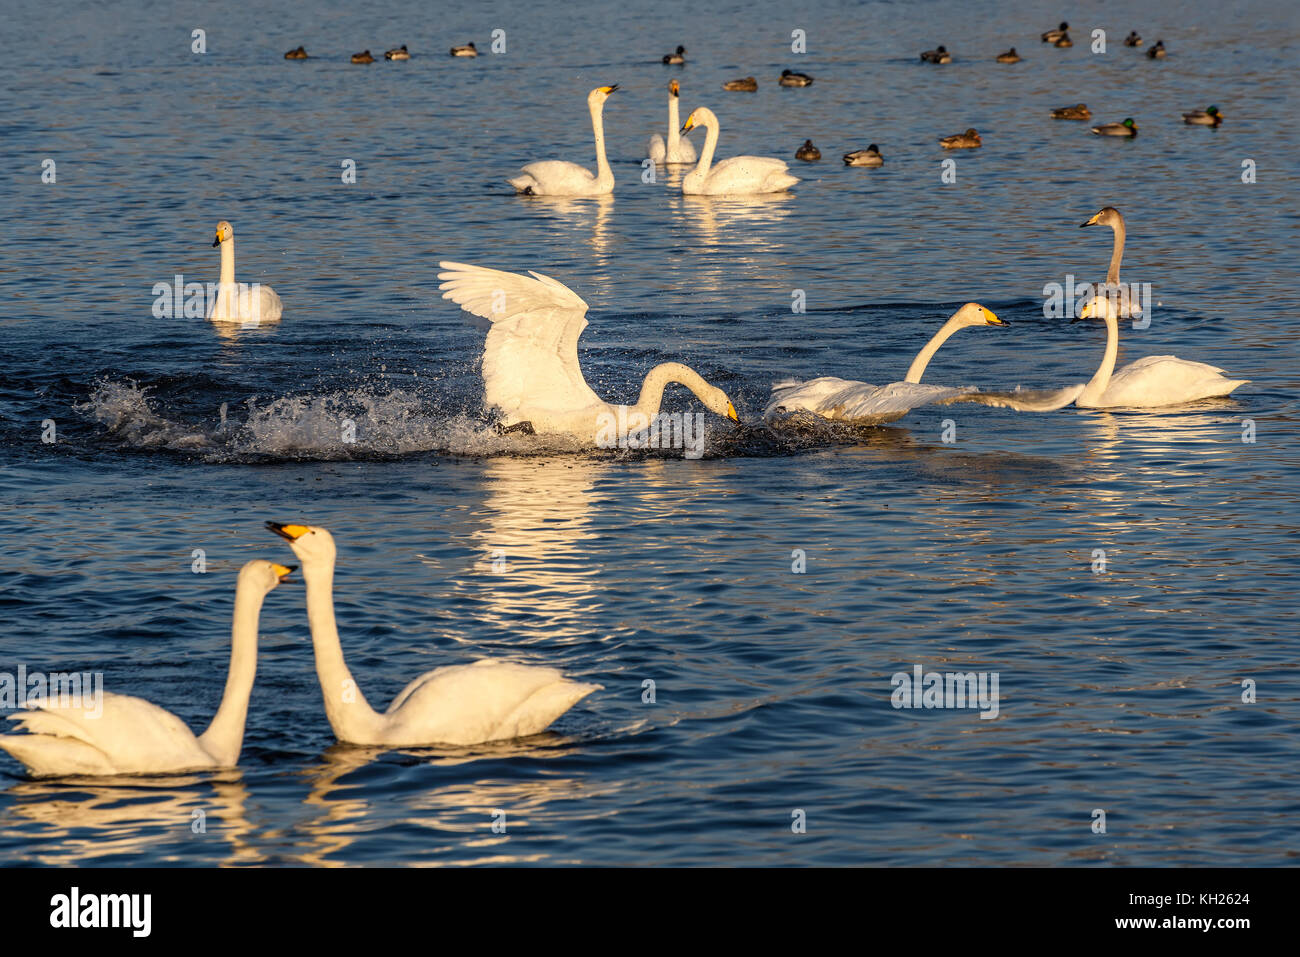 The picturesque scene with swans that swim, fight and bite on the lake on a frosty sunny day Stock Photo